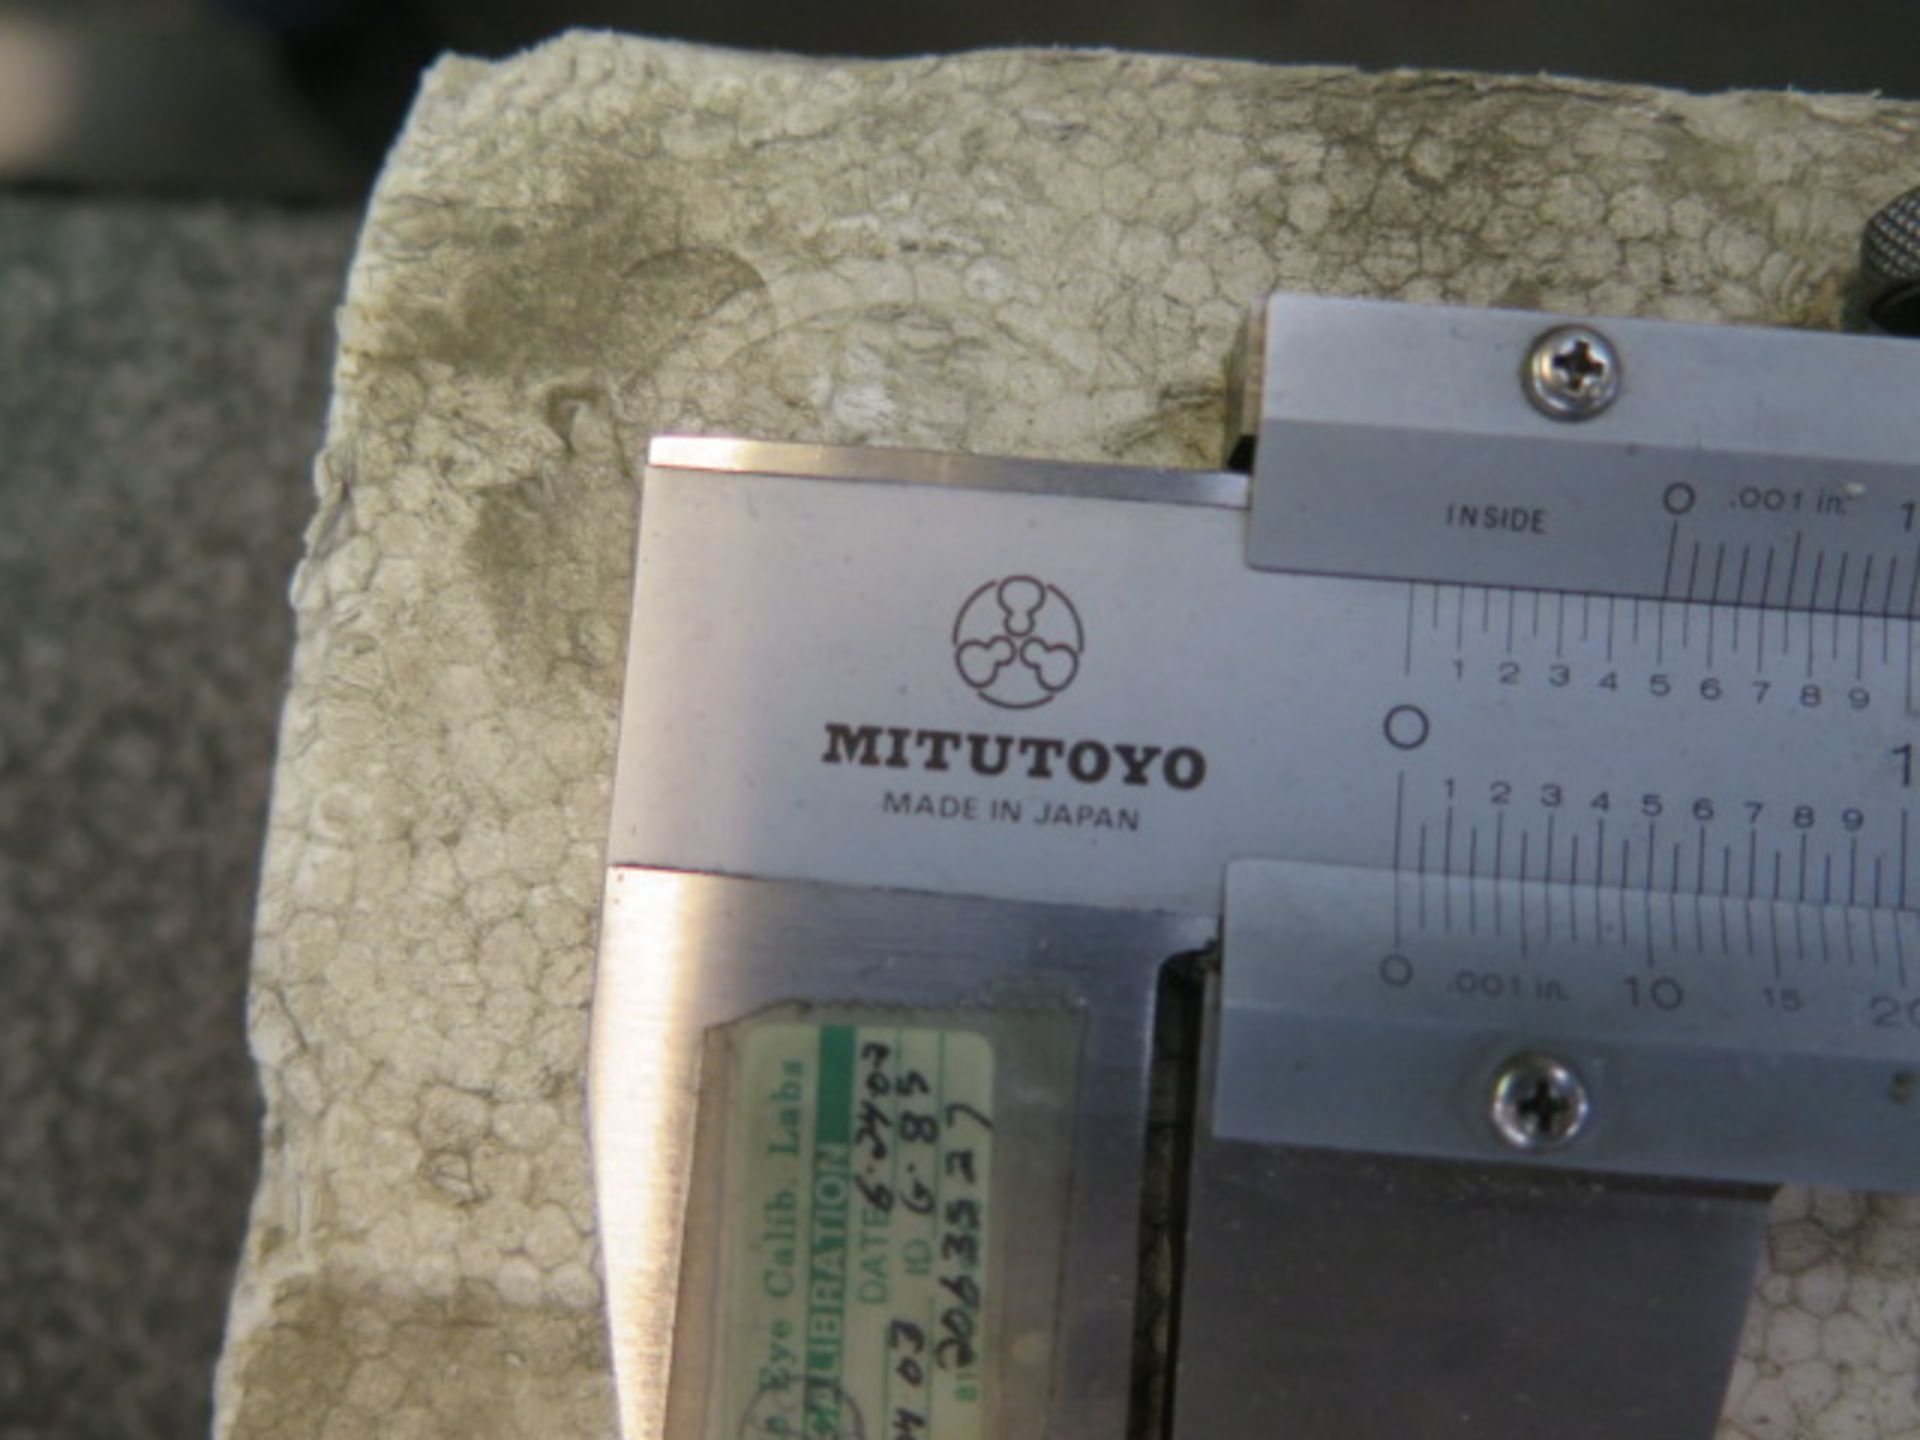 Mitutoyo and Kanon 24” Vernier Calipers (SOLD AS-IS - NO WARRANTY) - Image 4 of 4